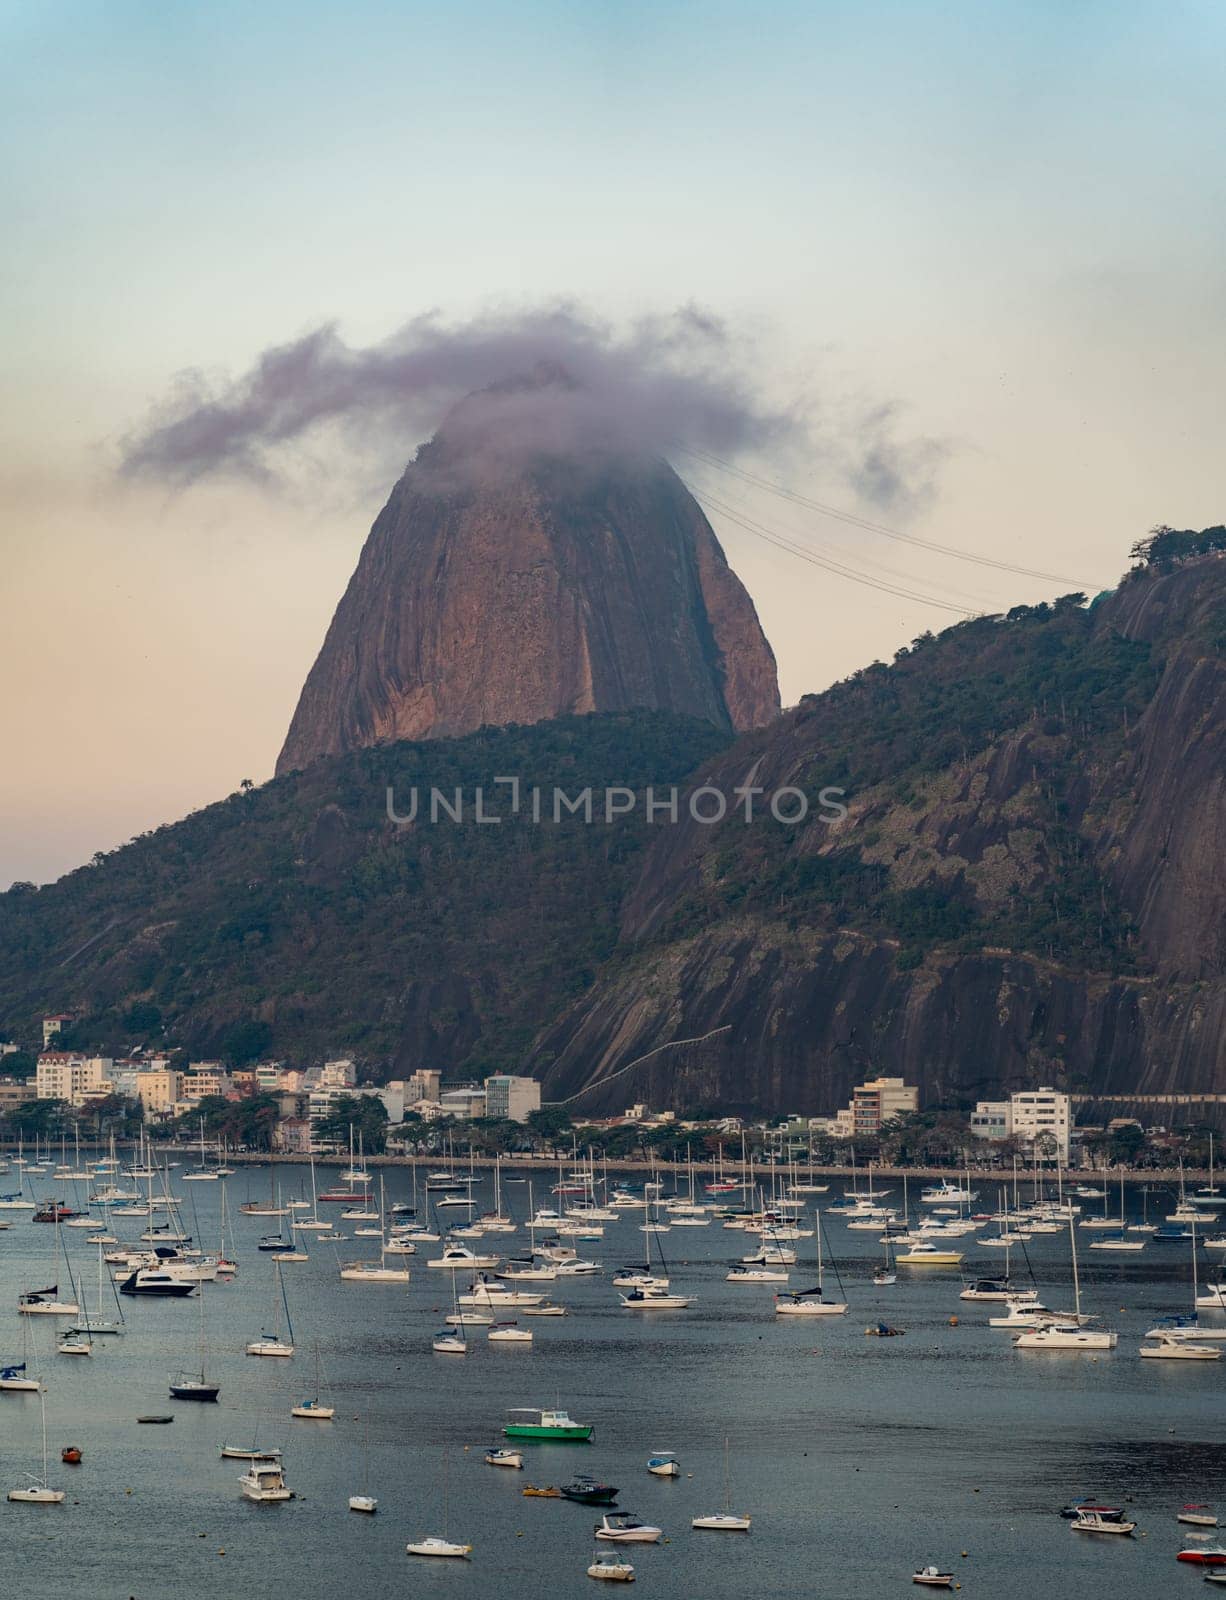 Cloud-shrouded Sugarloaf Mountain overlooks serene bay with boats at dusk in Rio.